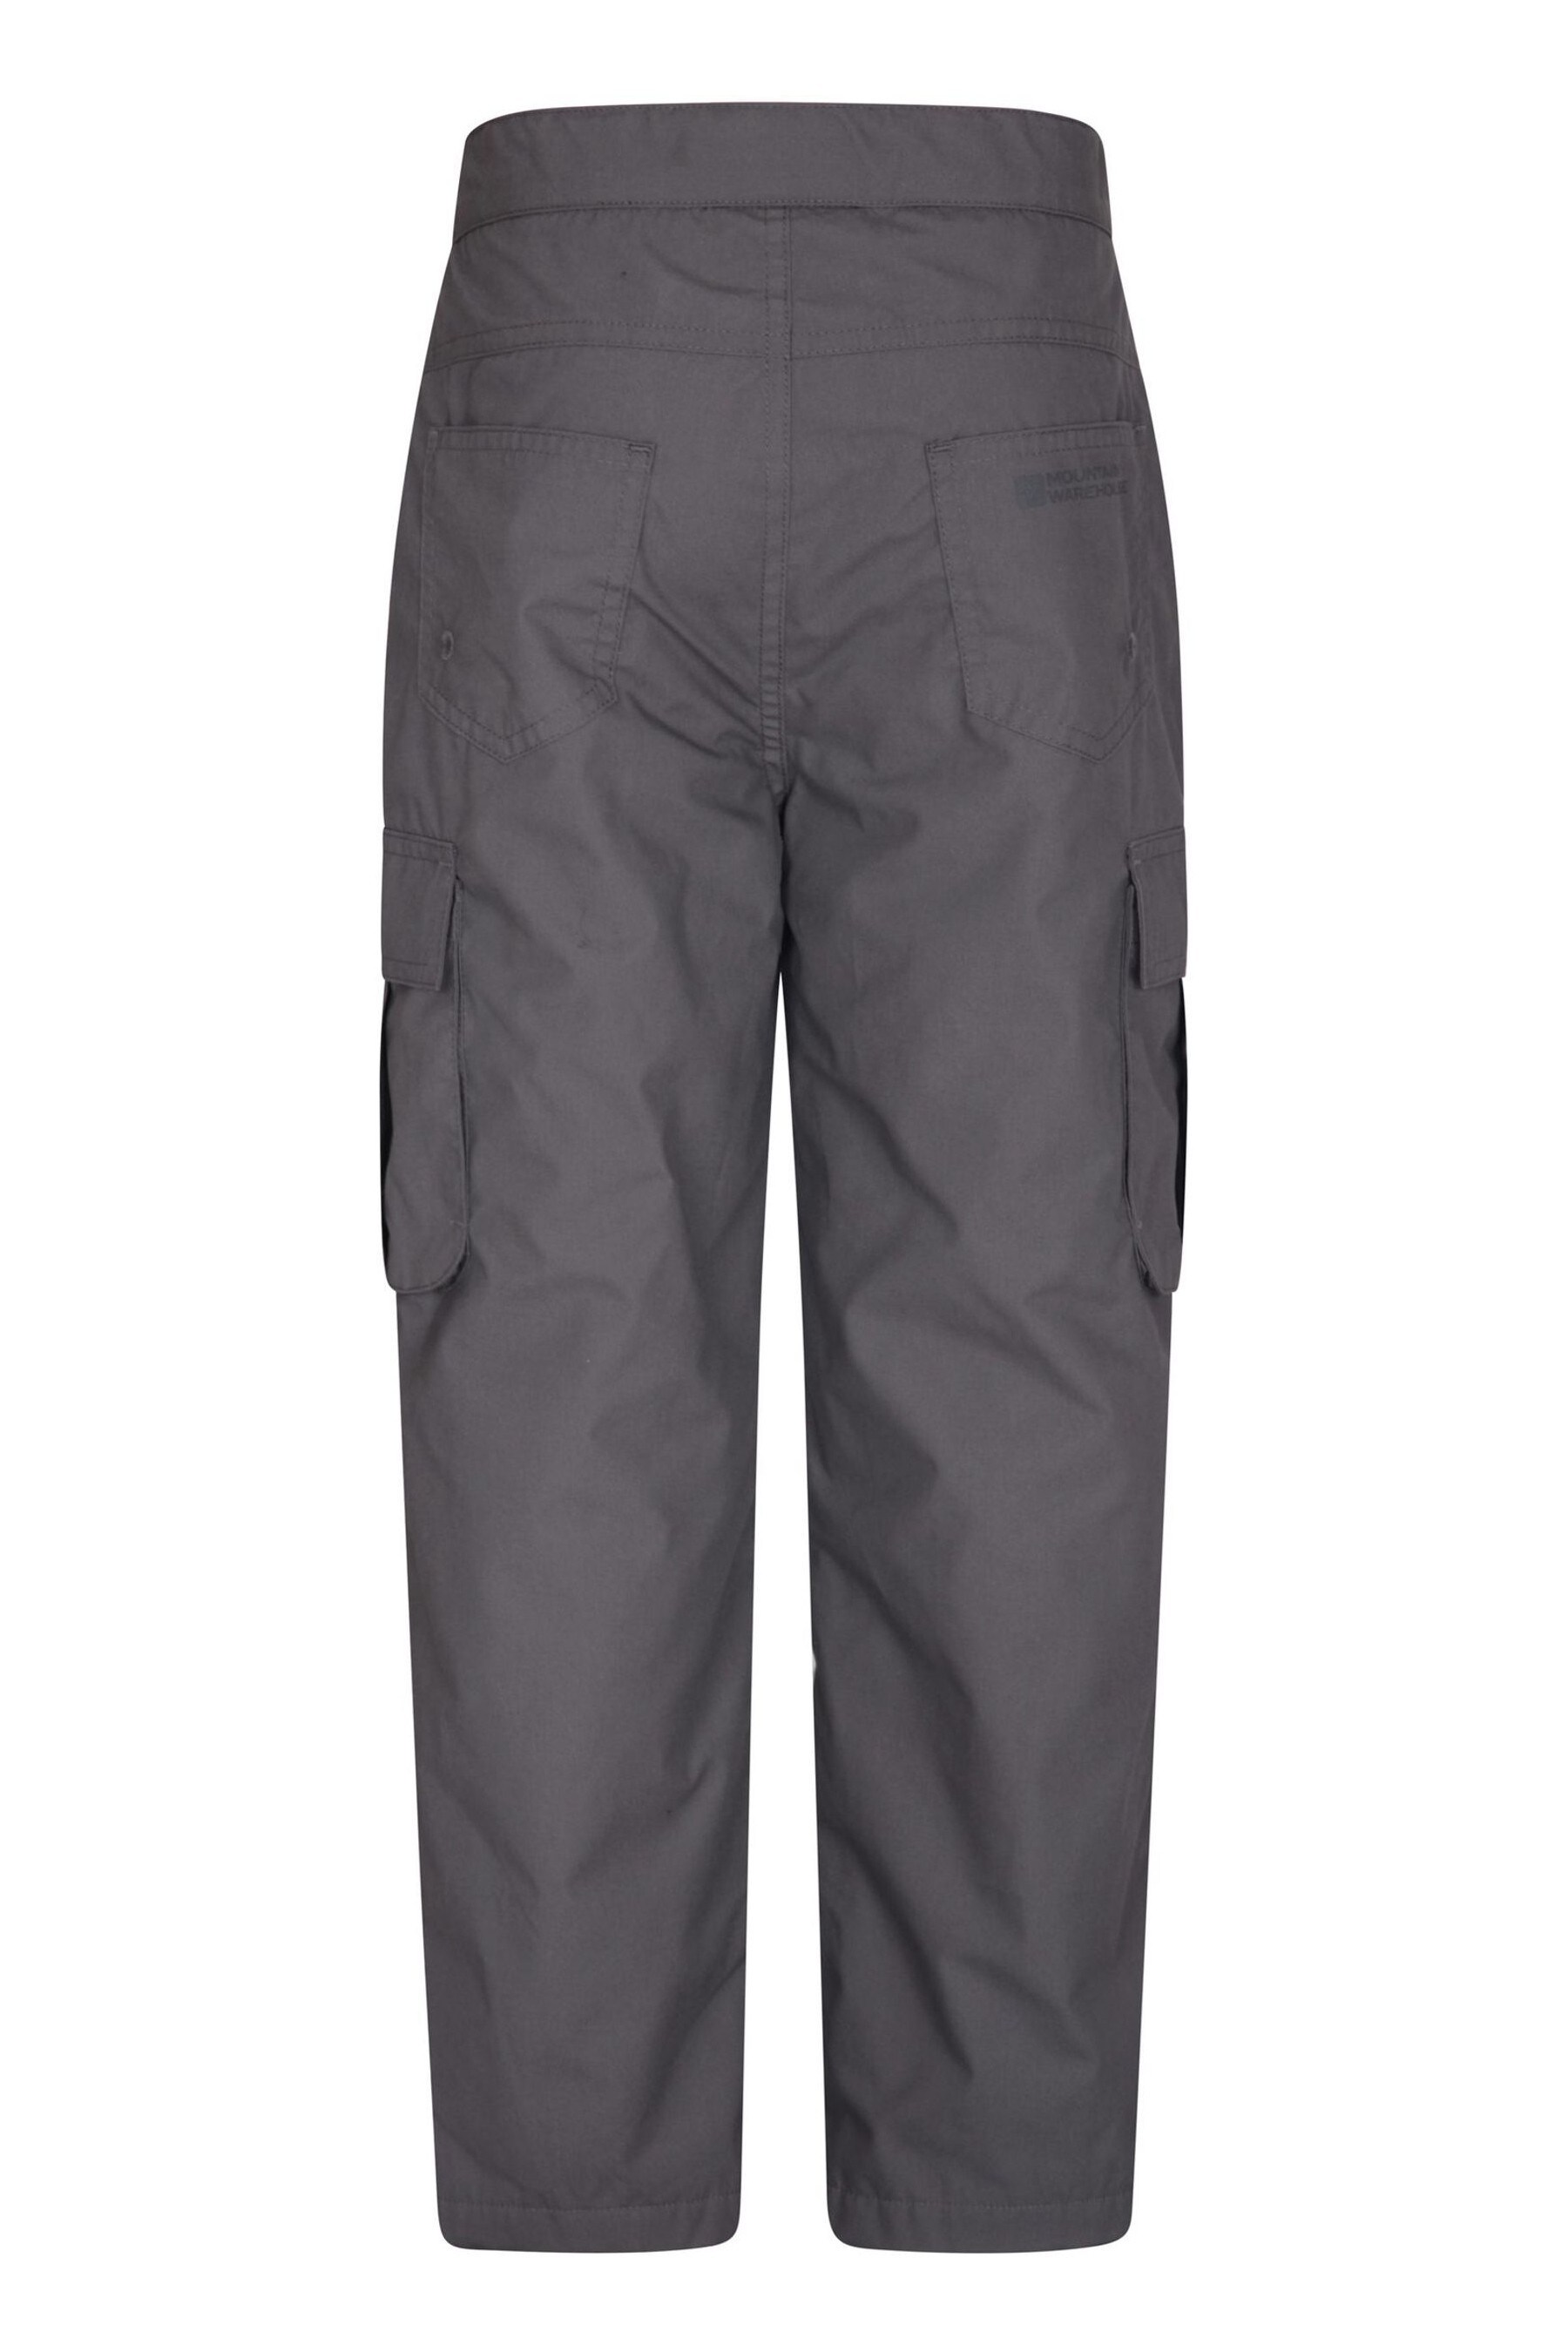 Buy Mountain Warehouse Grey Winter Trek Youth Trousers from the Next UK ...